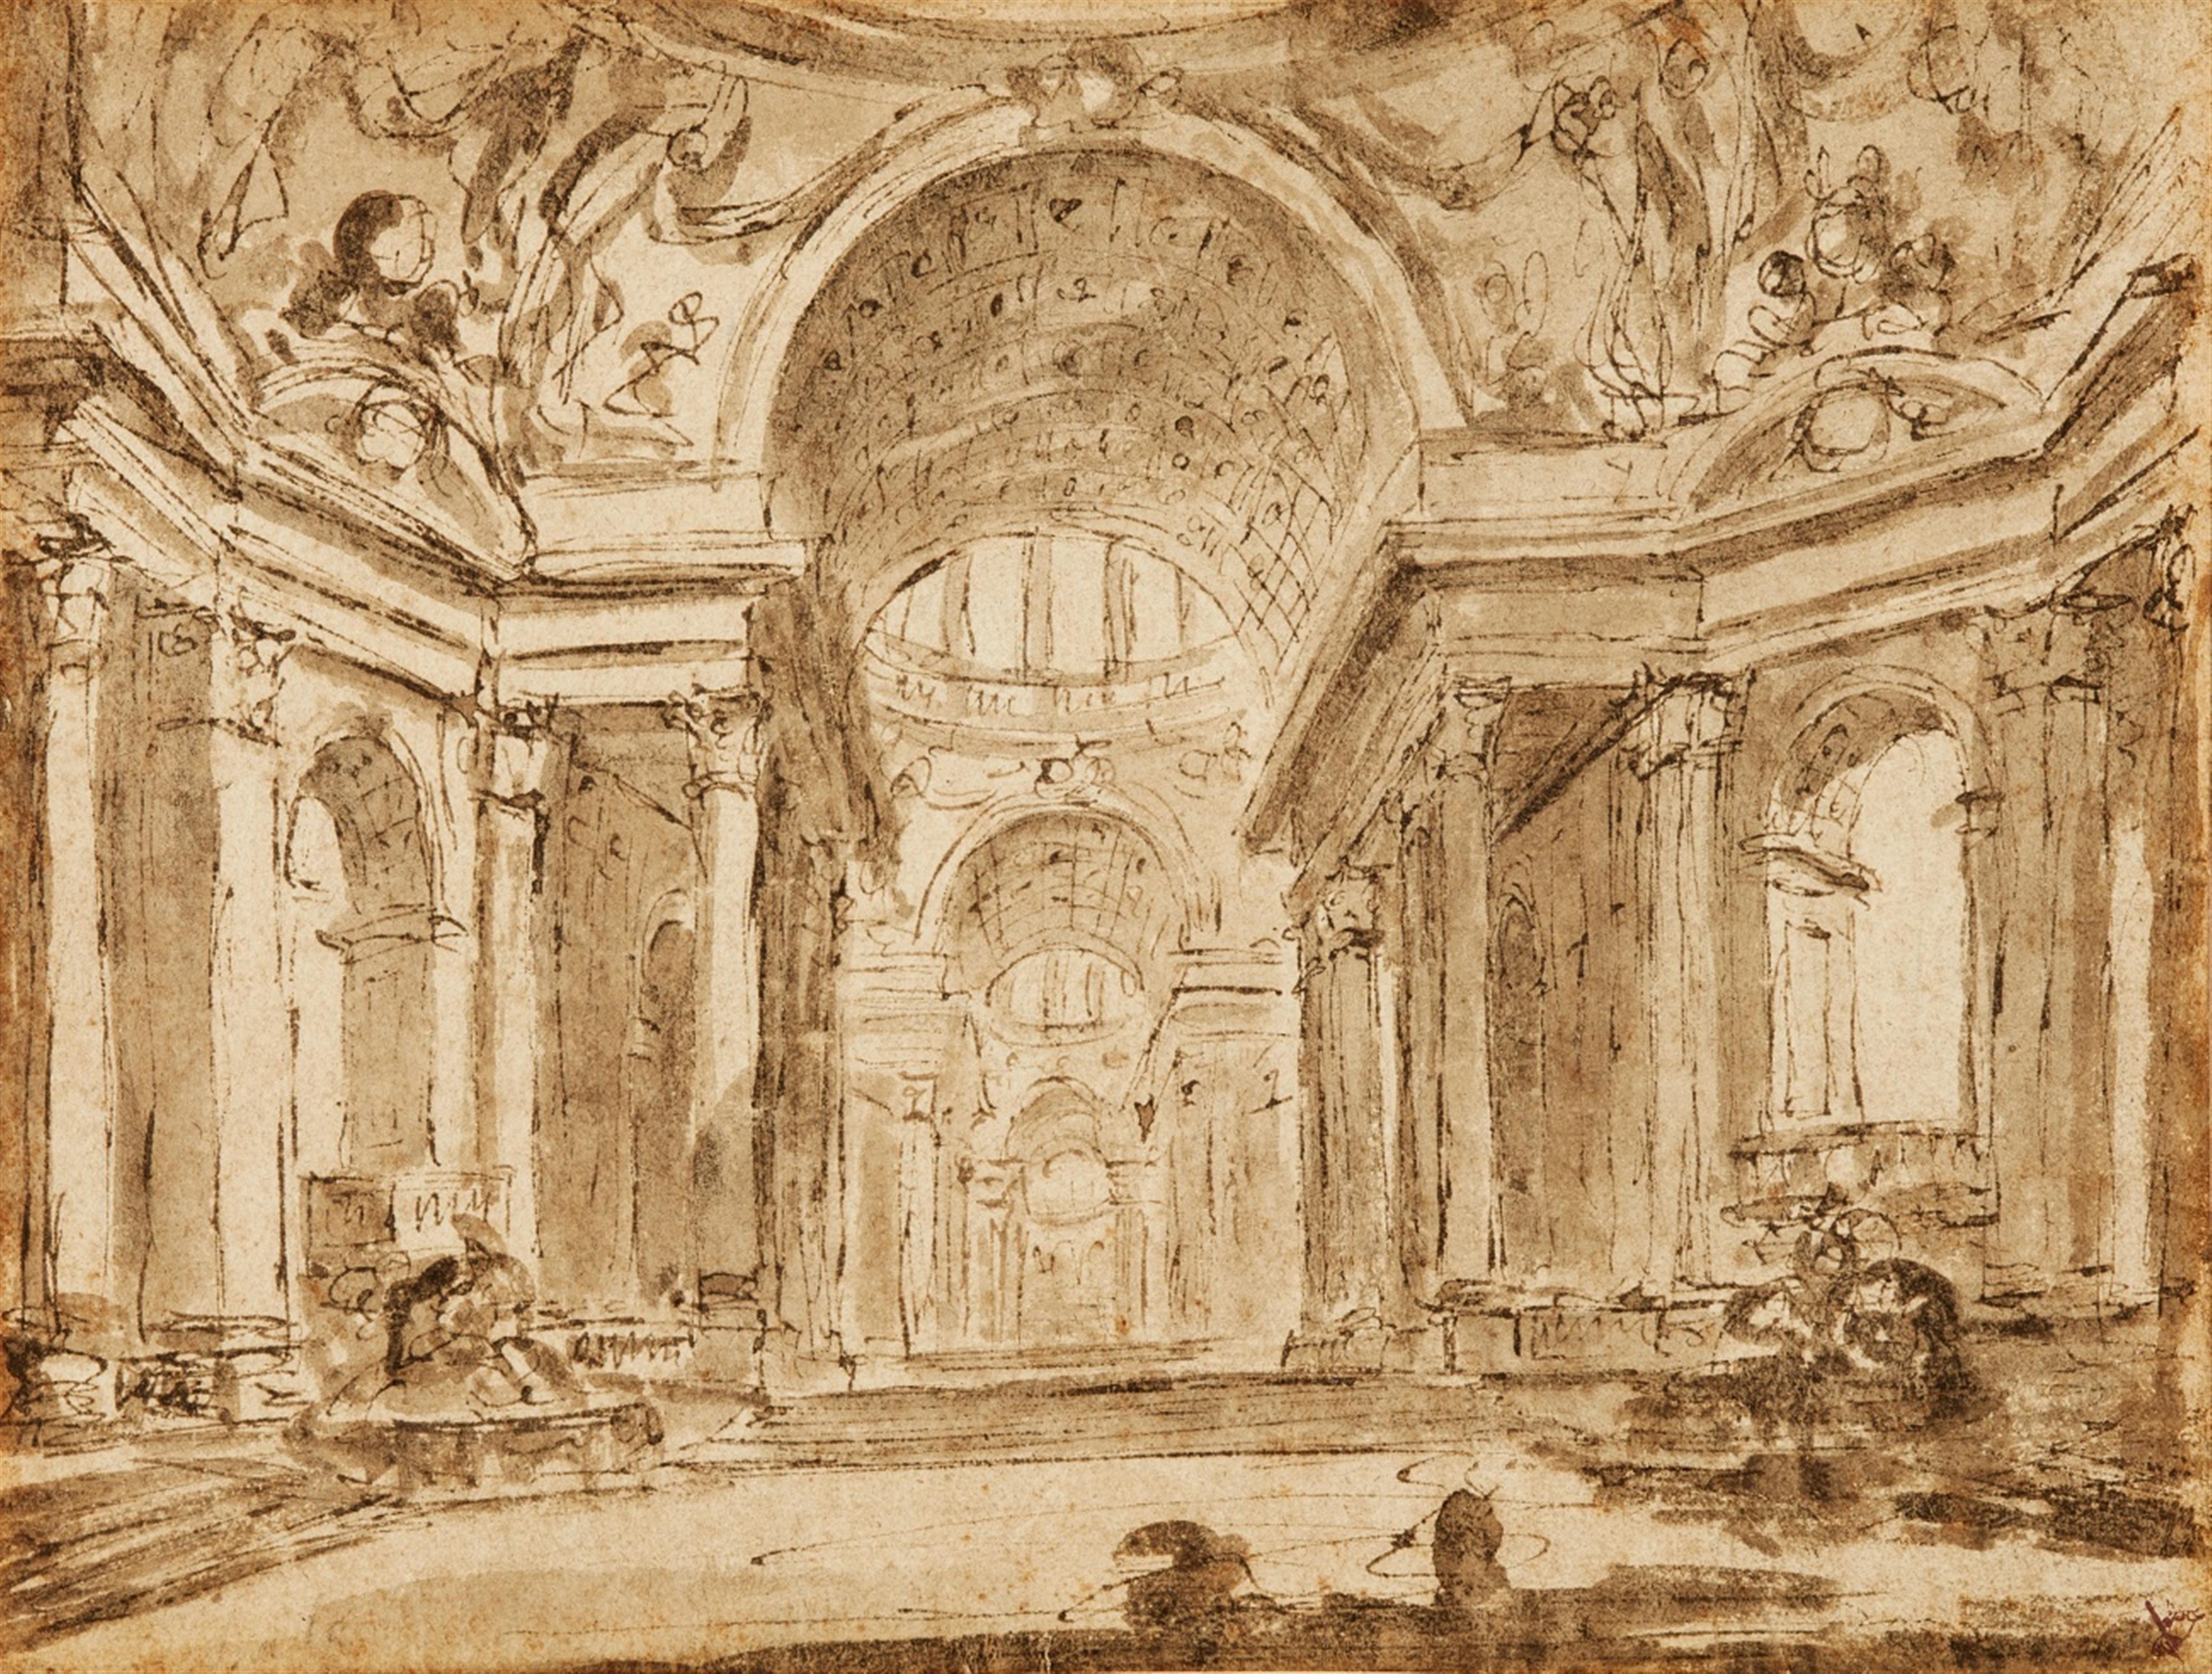 Charles Michel-Ange Challe - Interior of a Baroque Church - image-1